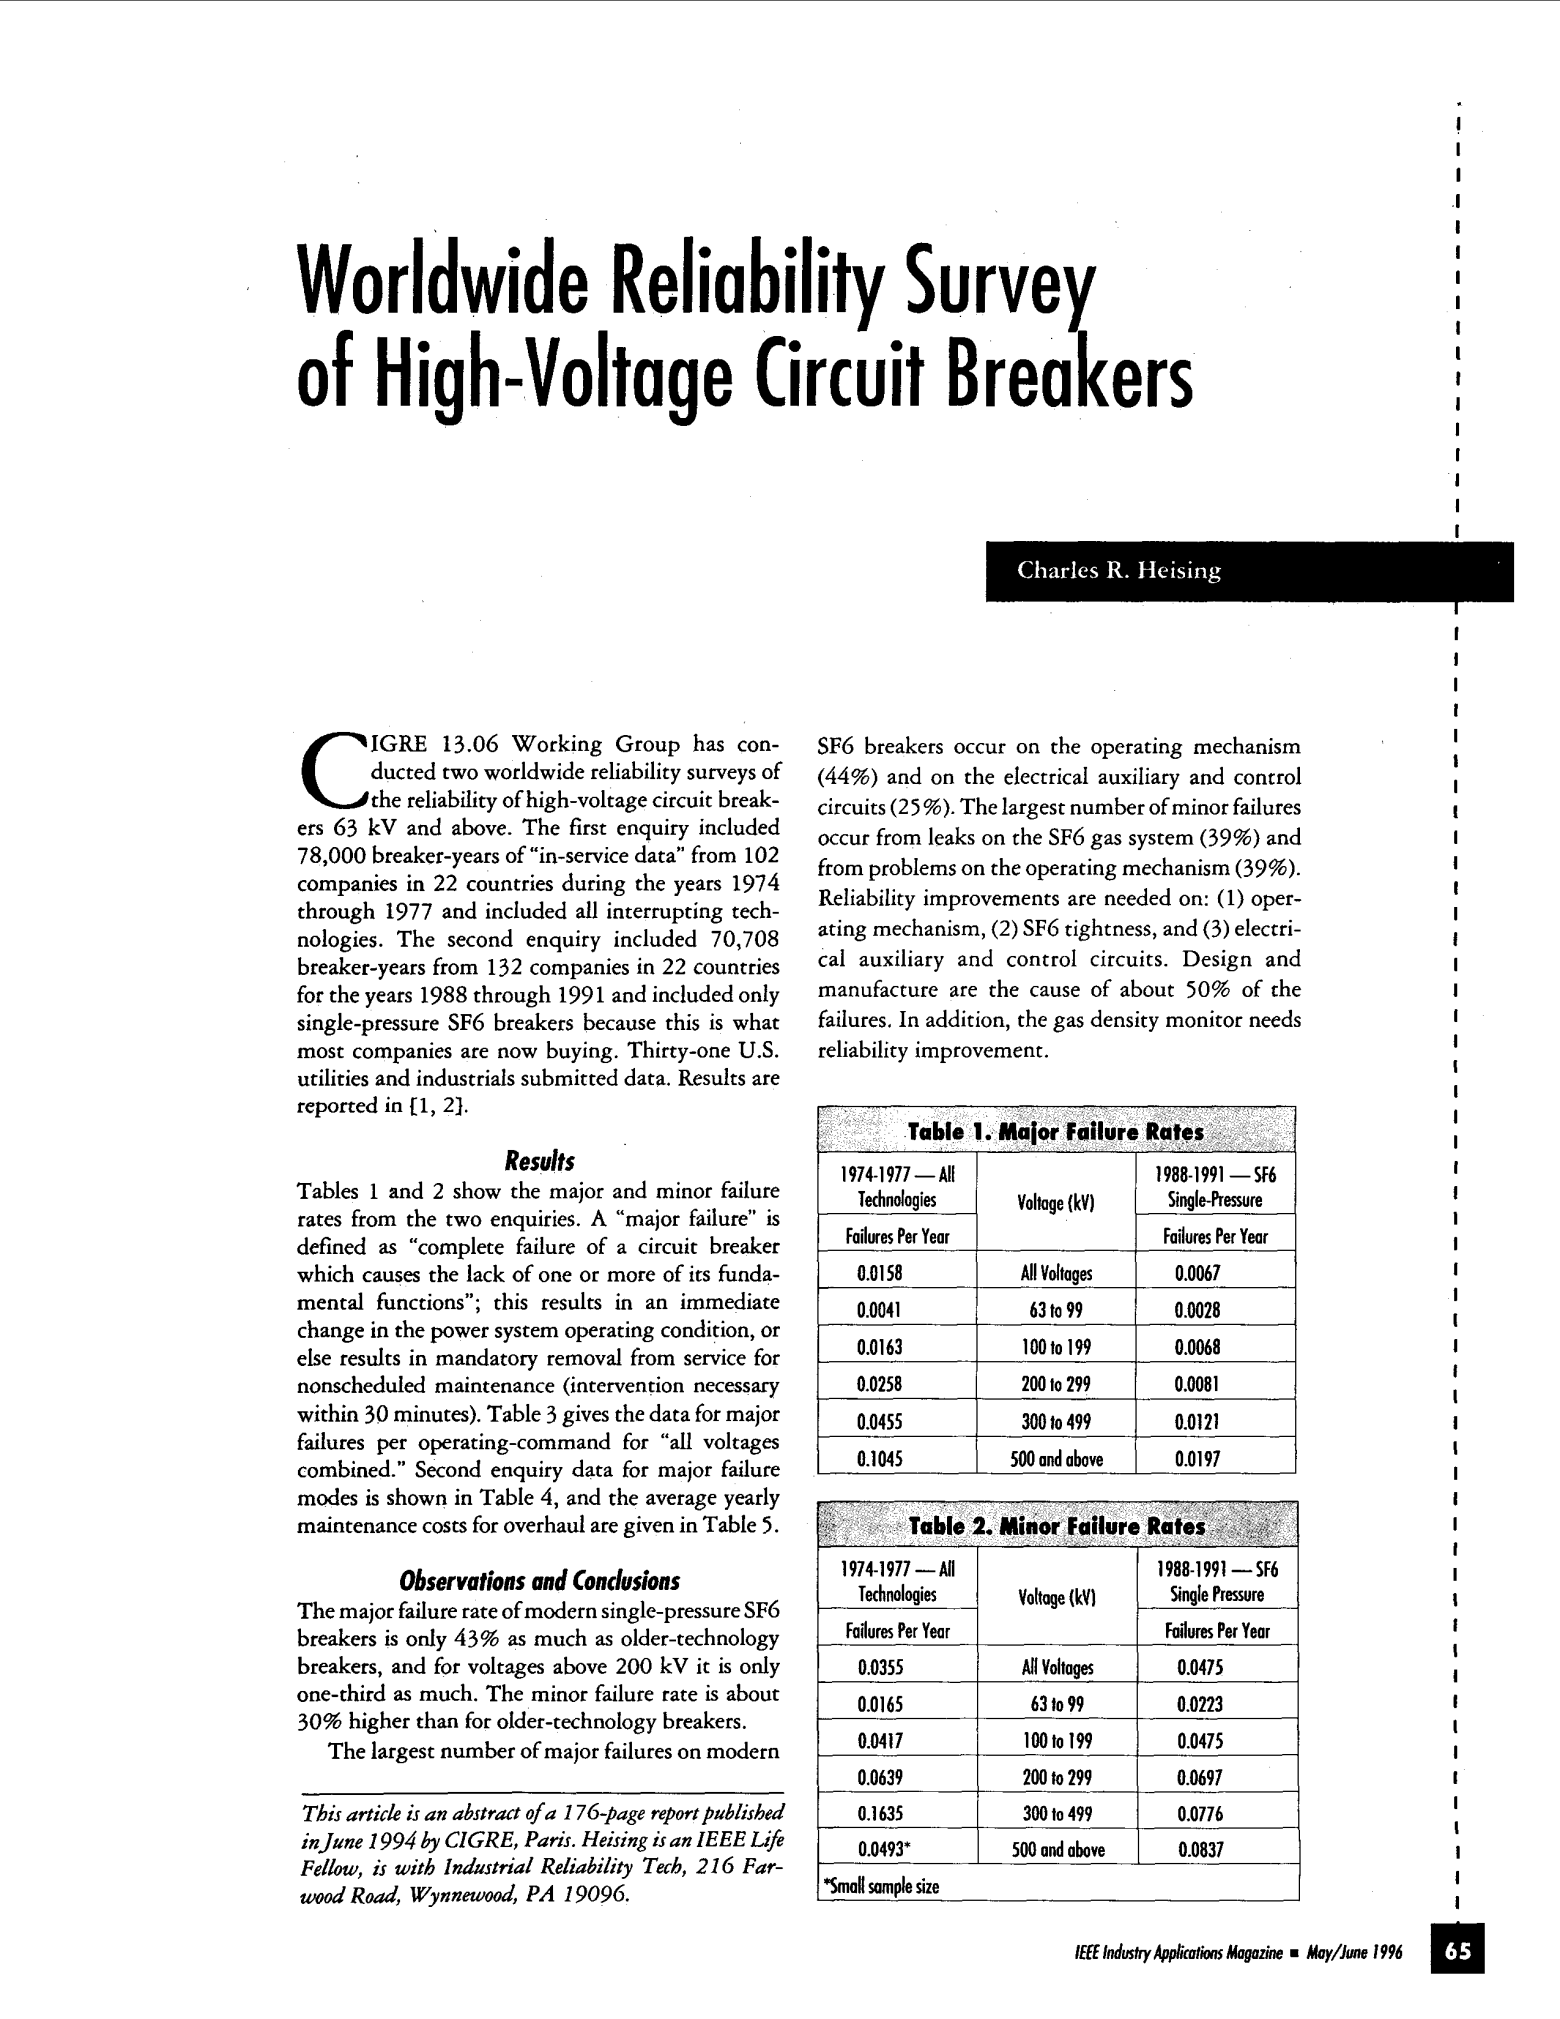 Worldwide Reliability Survey of High-Voltage Circuit Breakers